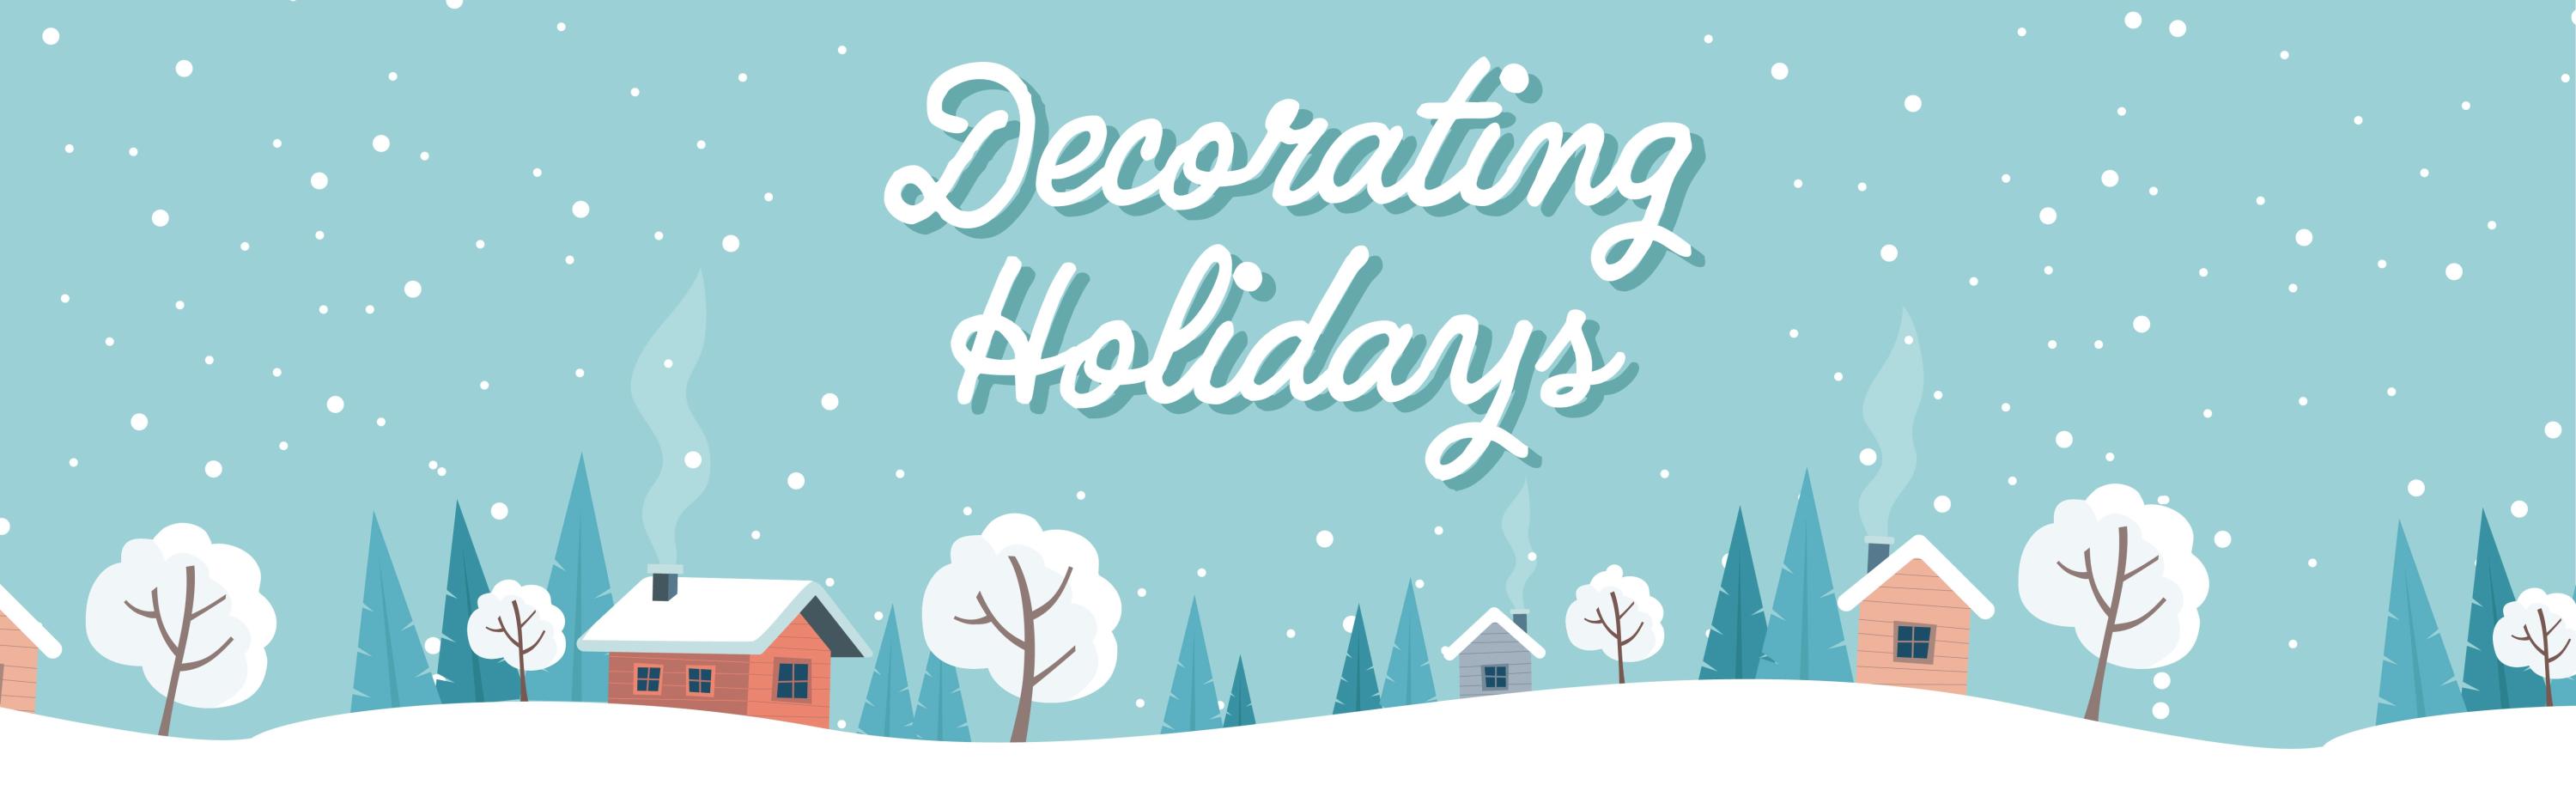 Decorating Holidays text over a snowy village